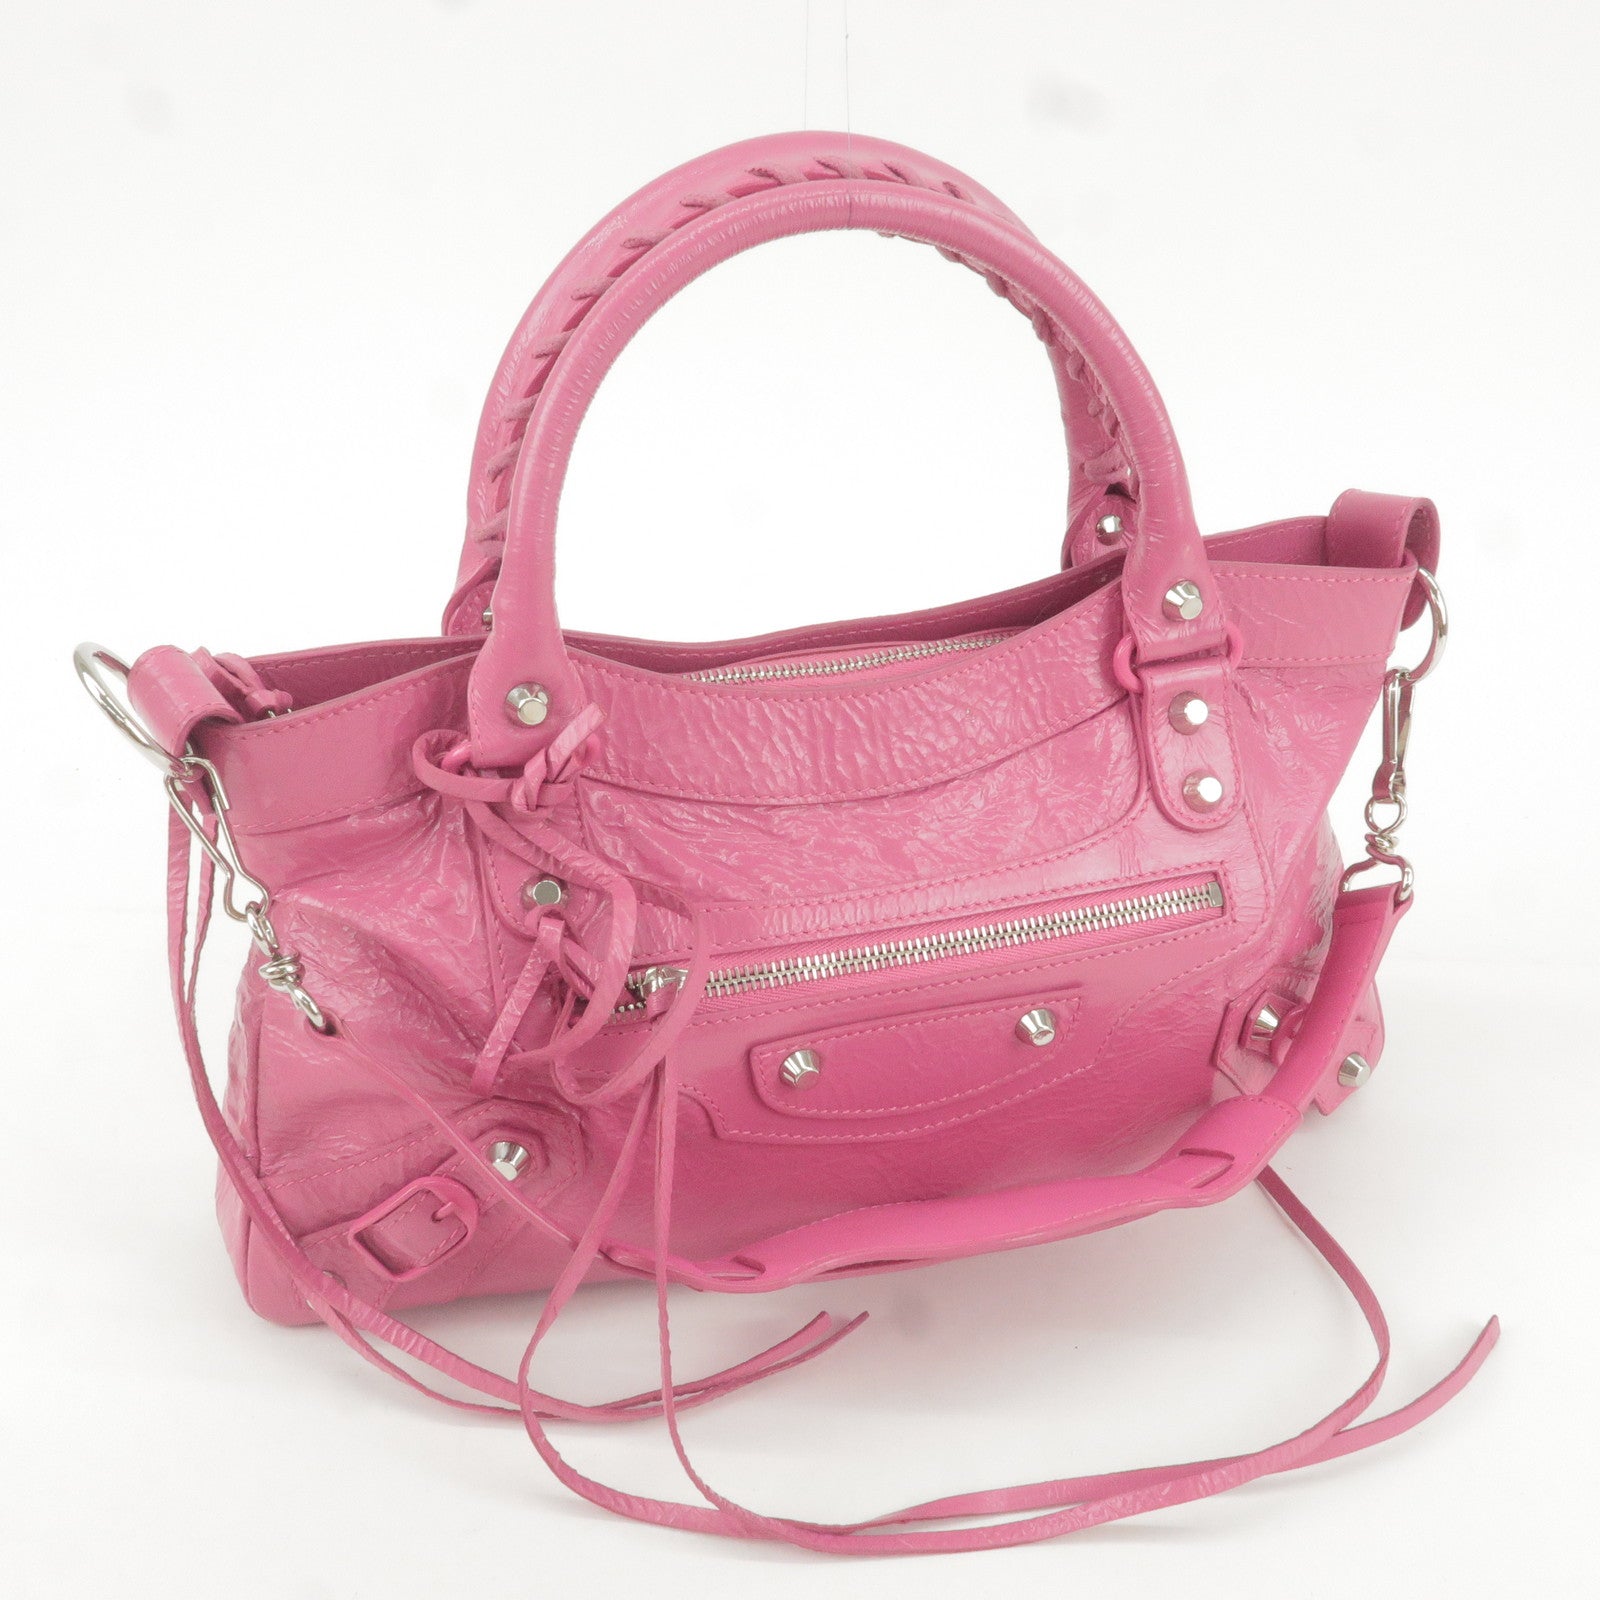 BALENCIAGA The First 103208 2 Way Shoulder Bag Hand Bag Leather Dusty Pink  Used